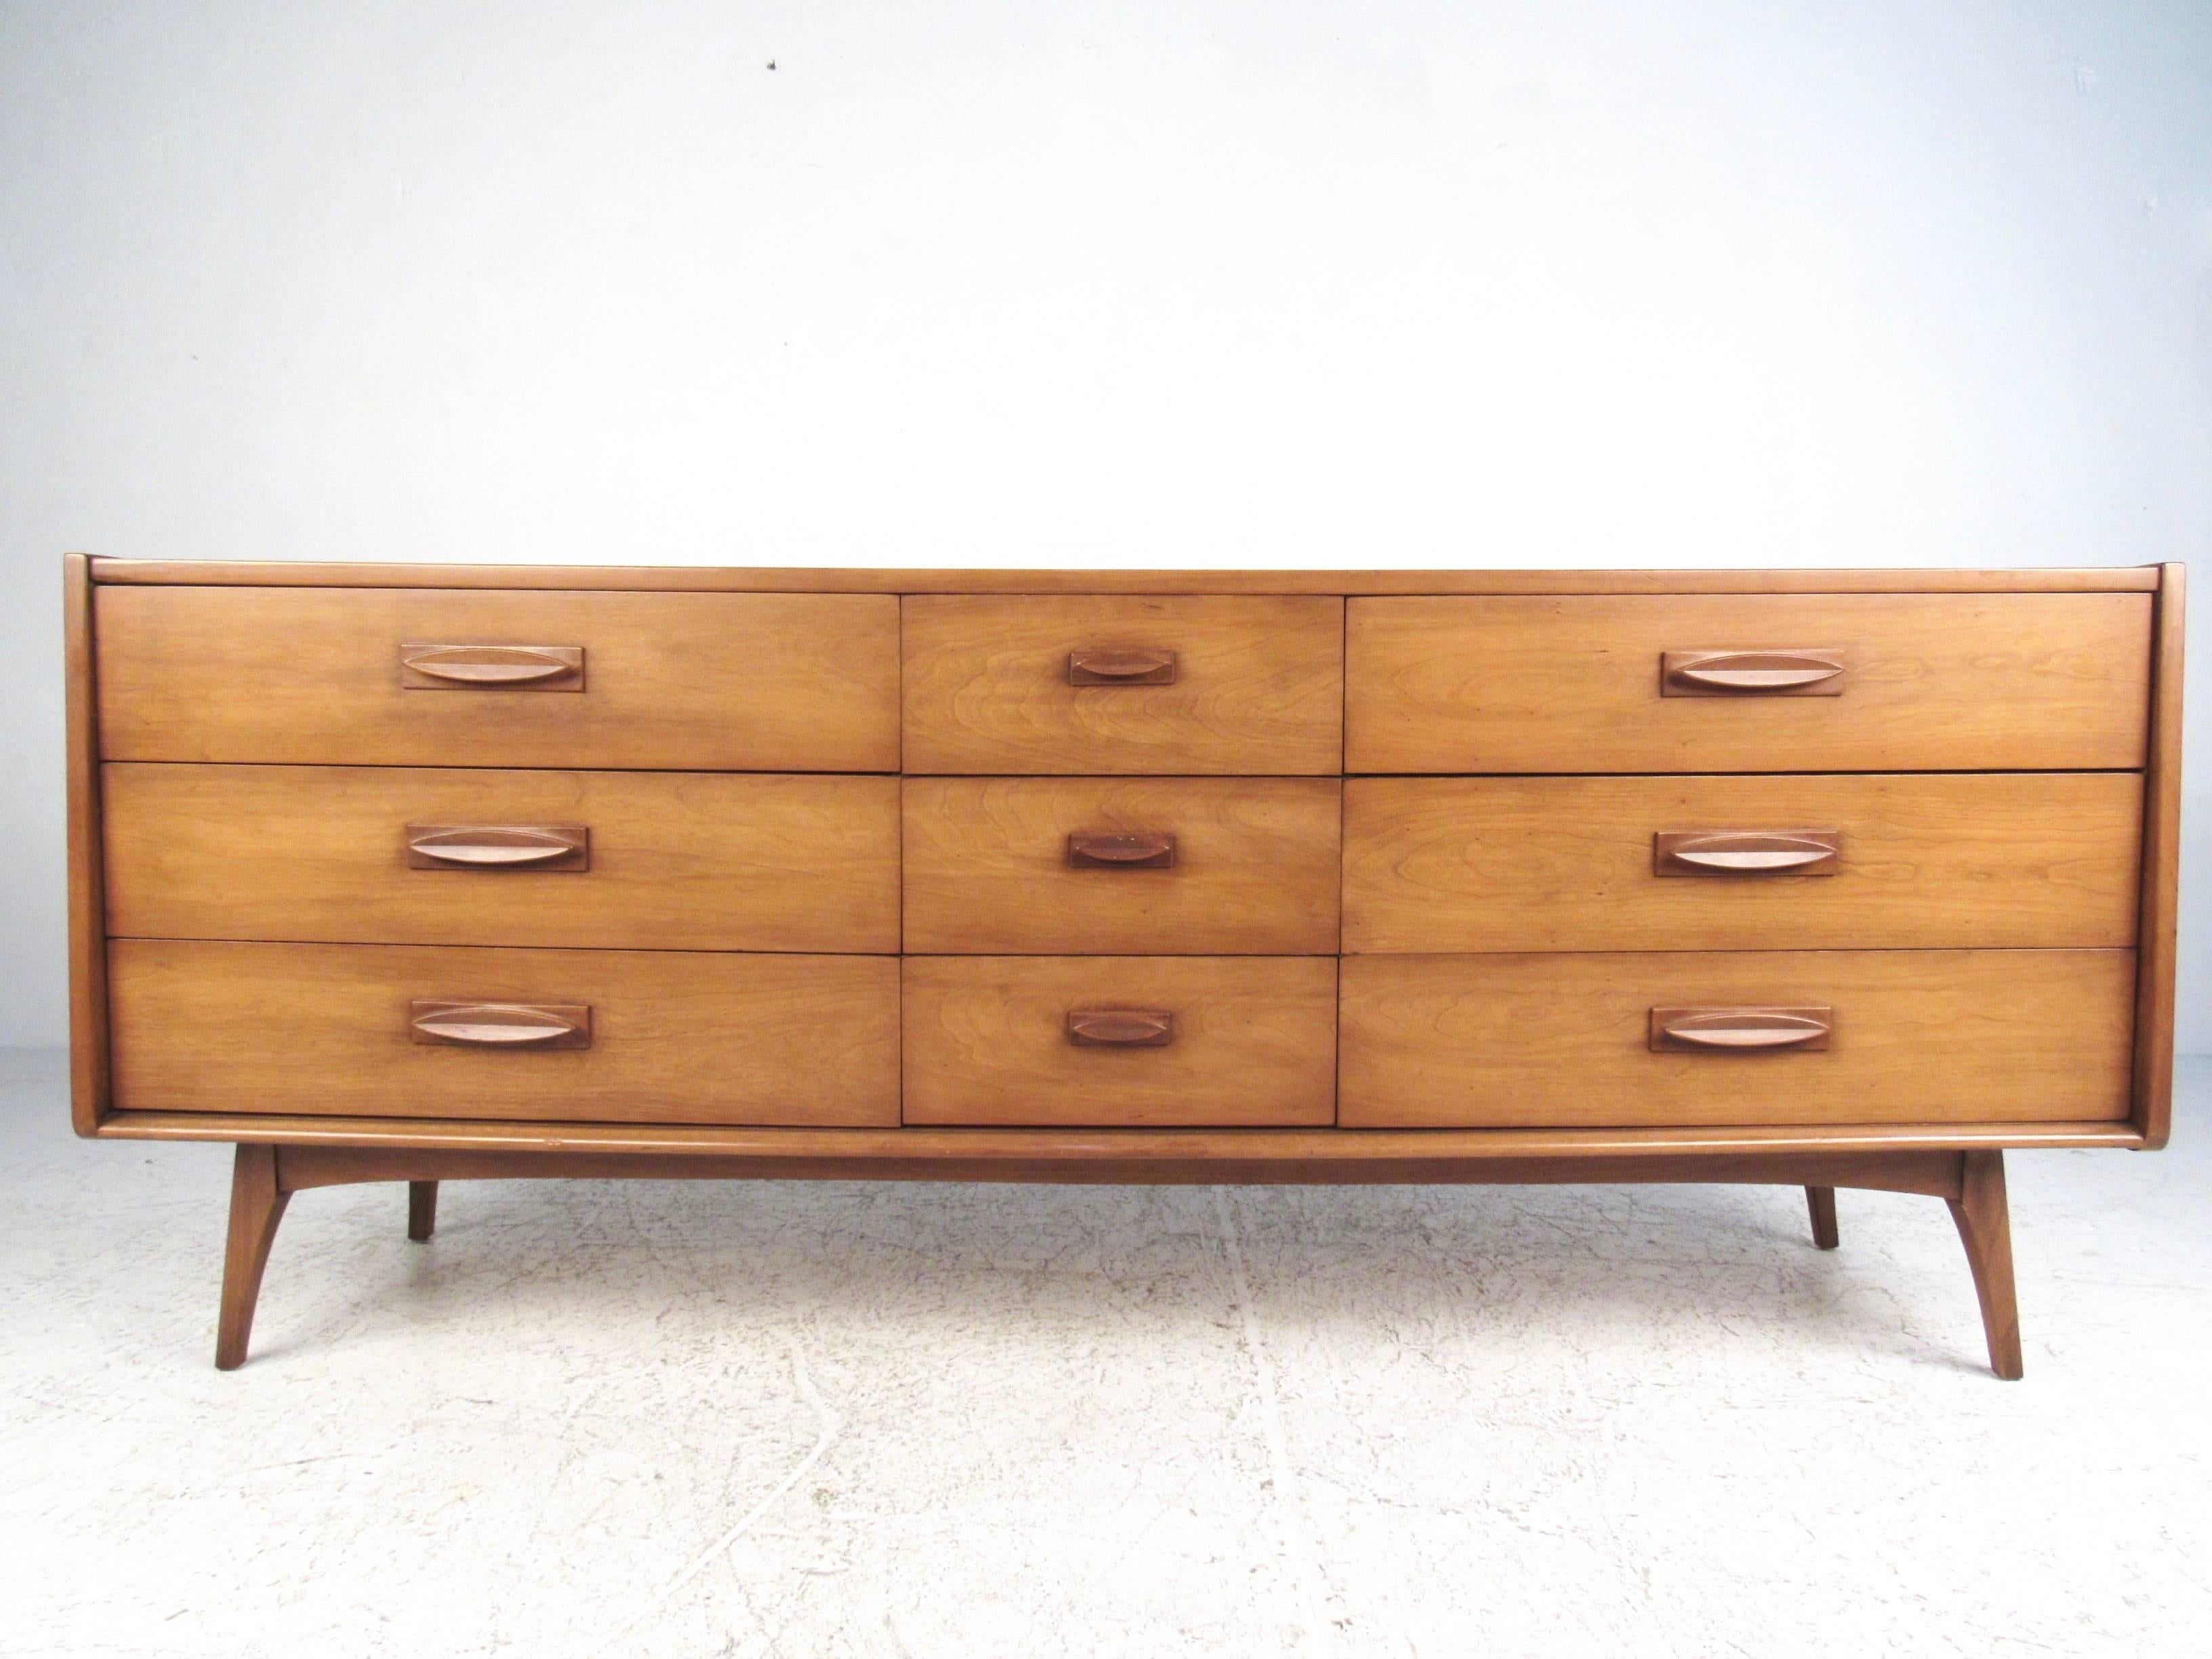 This beautiful pair of Mid-Century Modern storage dressers comes complete with matching two-drawer nightstand. Wonderful matching drawer pulls for all three pieces are the perfect addition to the simple, modern lines of the set. Plenty of stylish